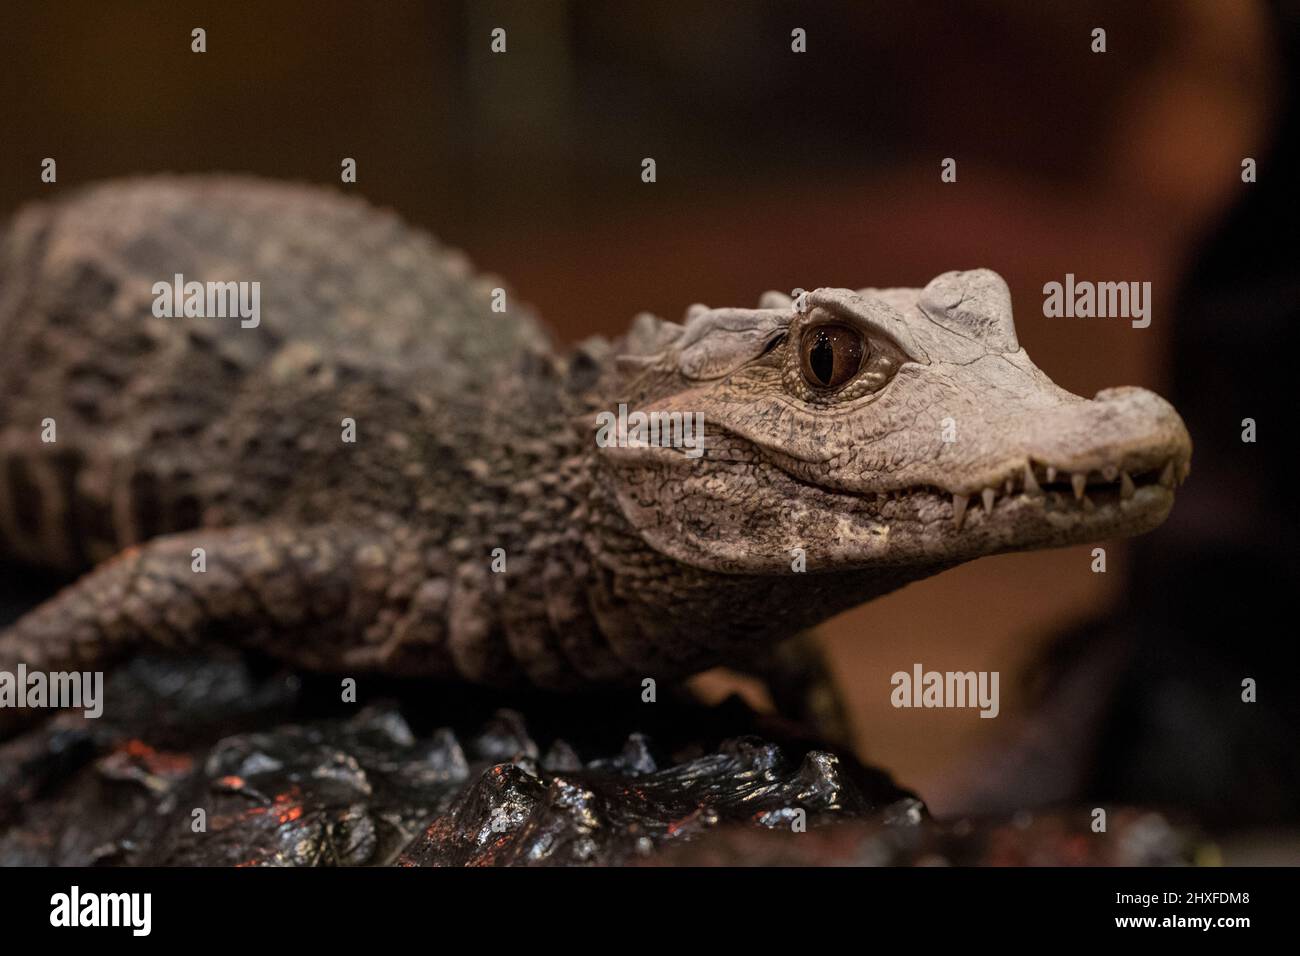 Caiman alligator portrait close up eyes and head. Carnivore hunter with sharp fangs. Stock Photo